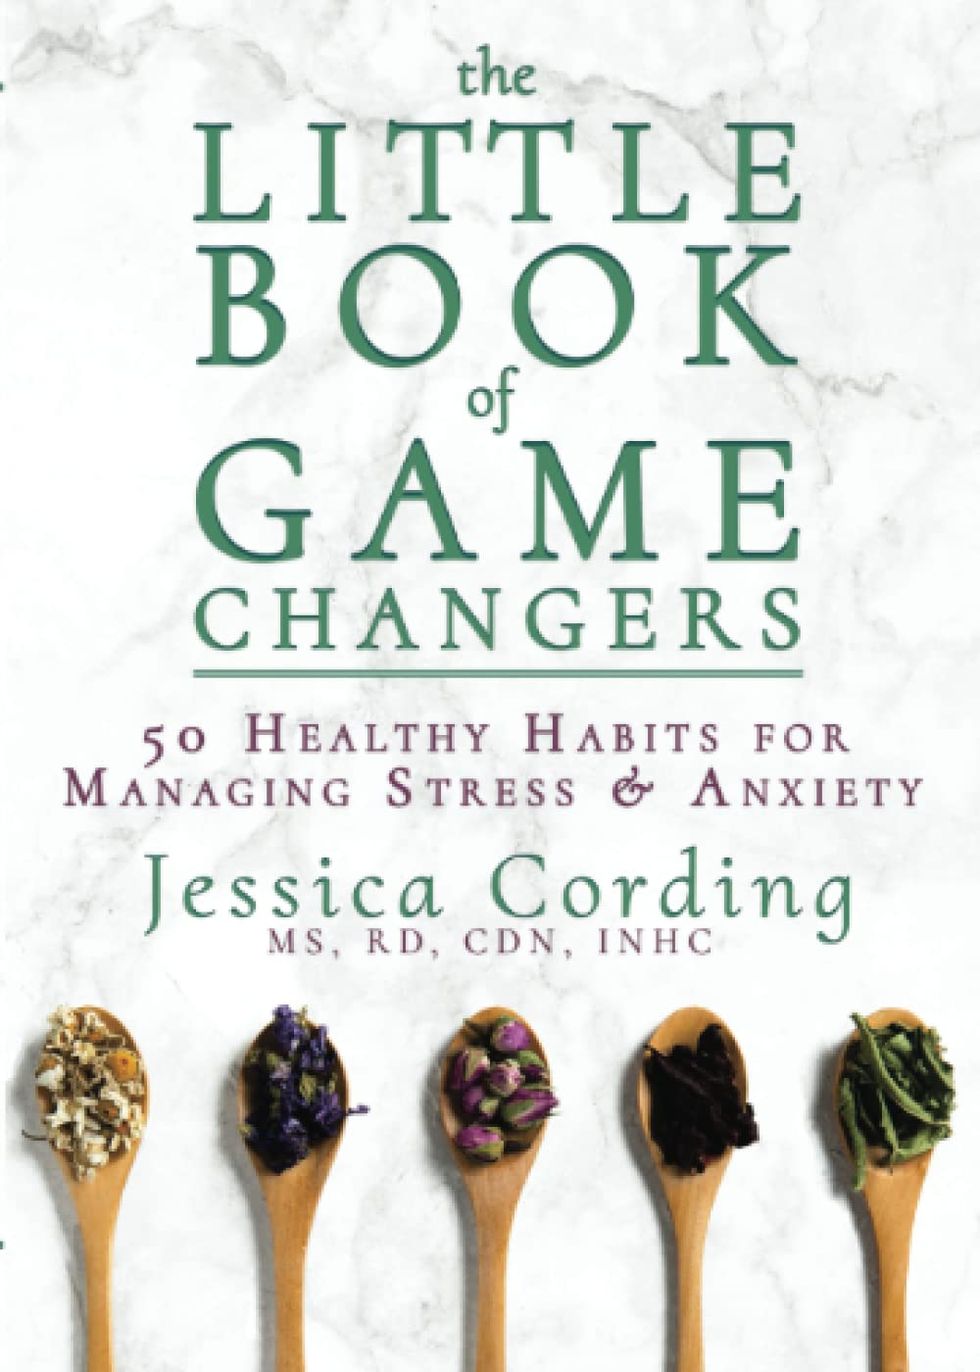 The Little Book Of Game Changers: 50 Healthy Habits for Managing Stress & Anxiety